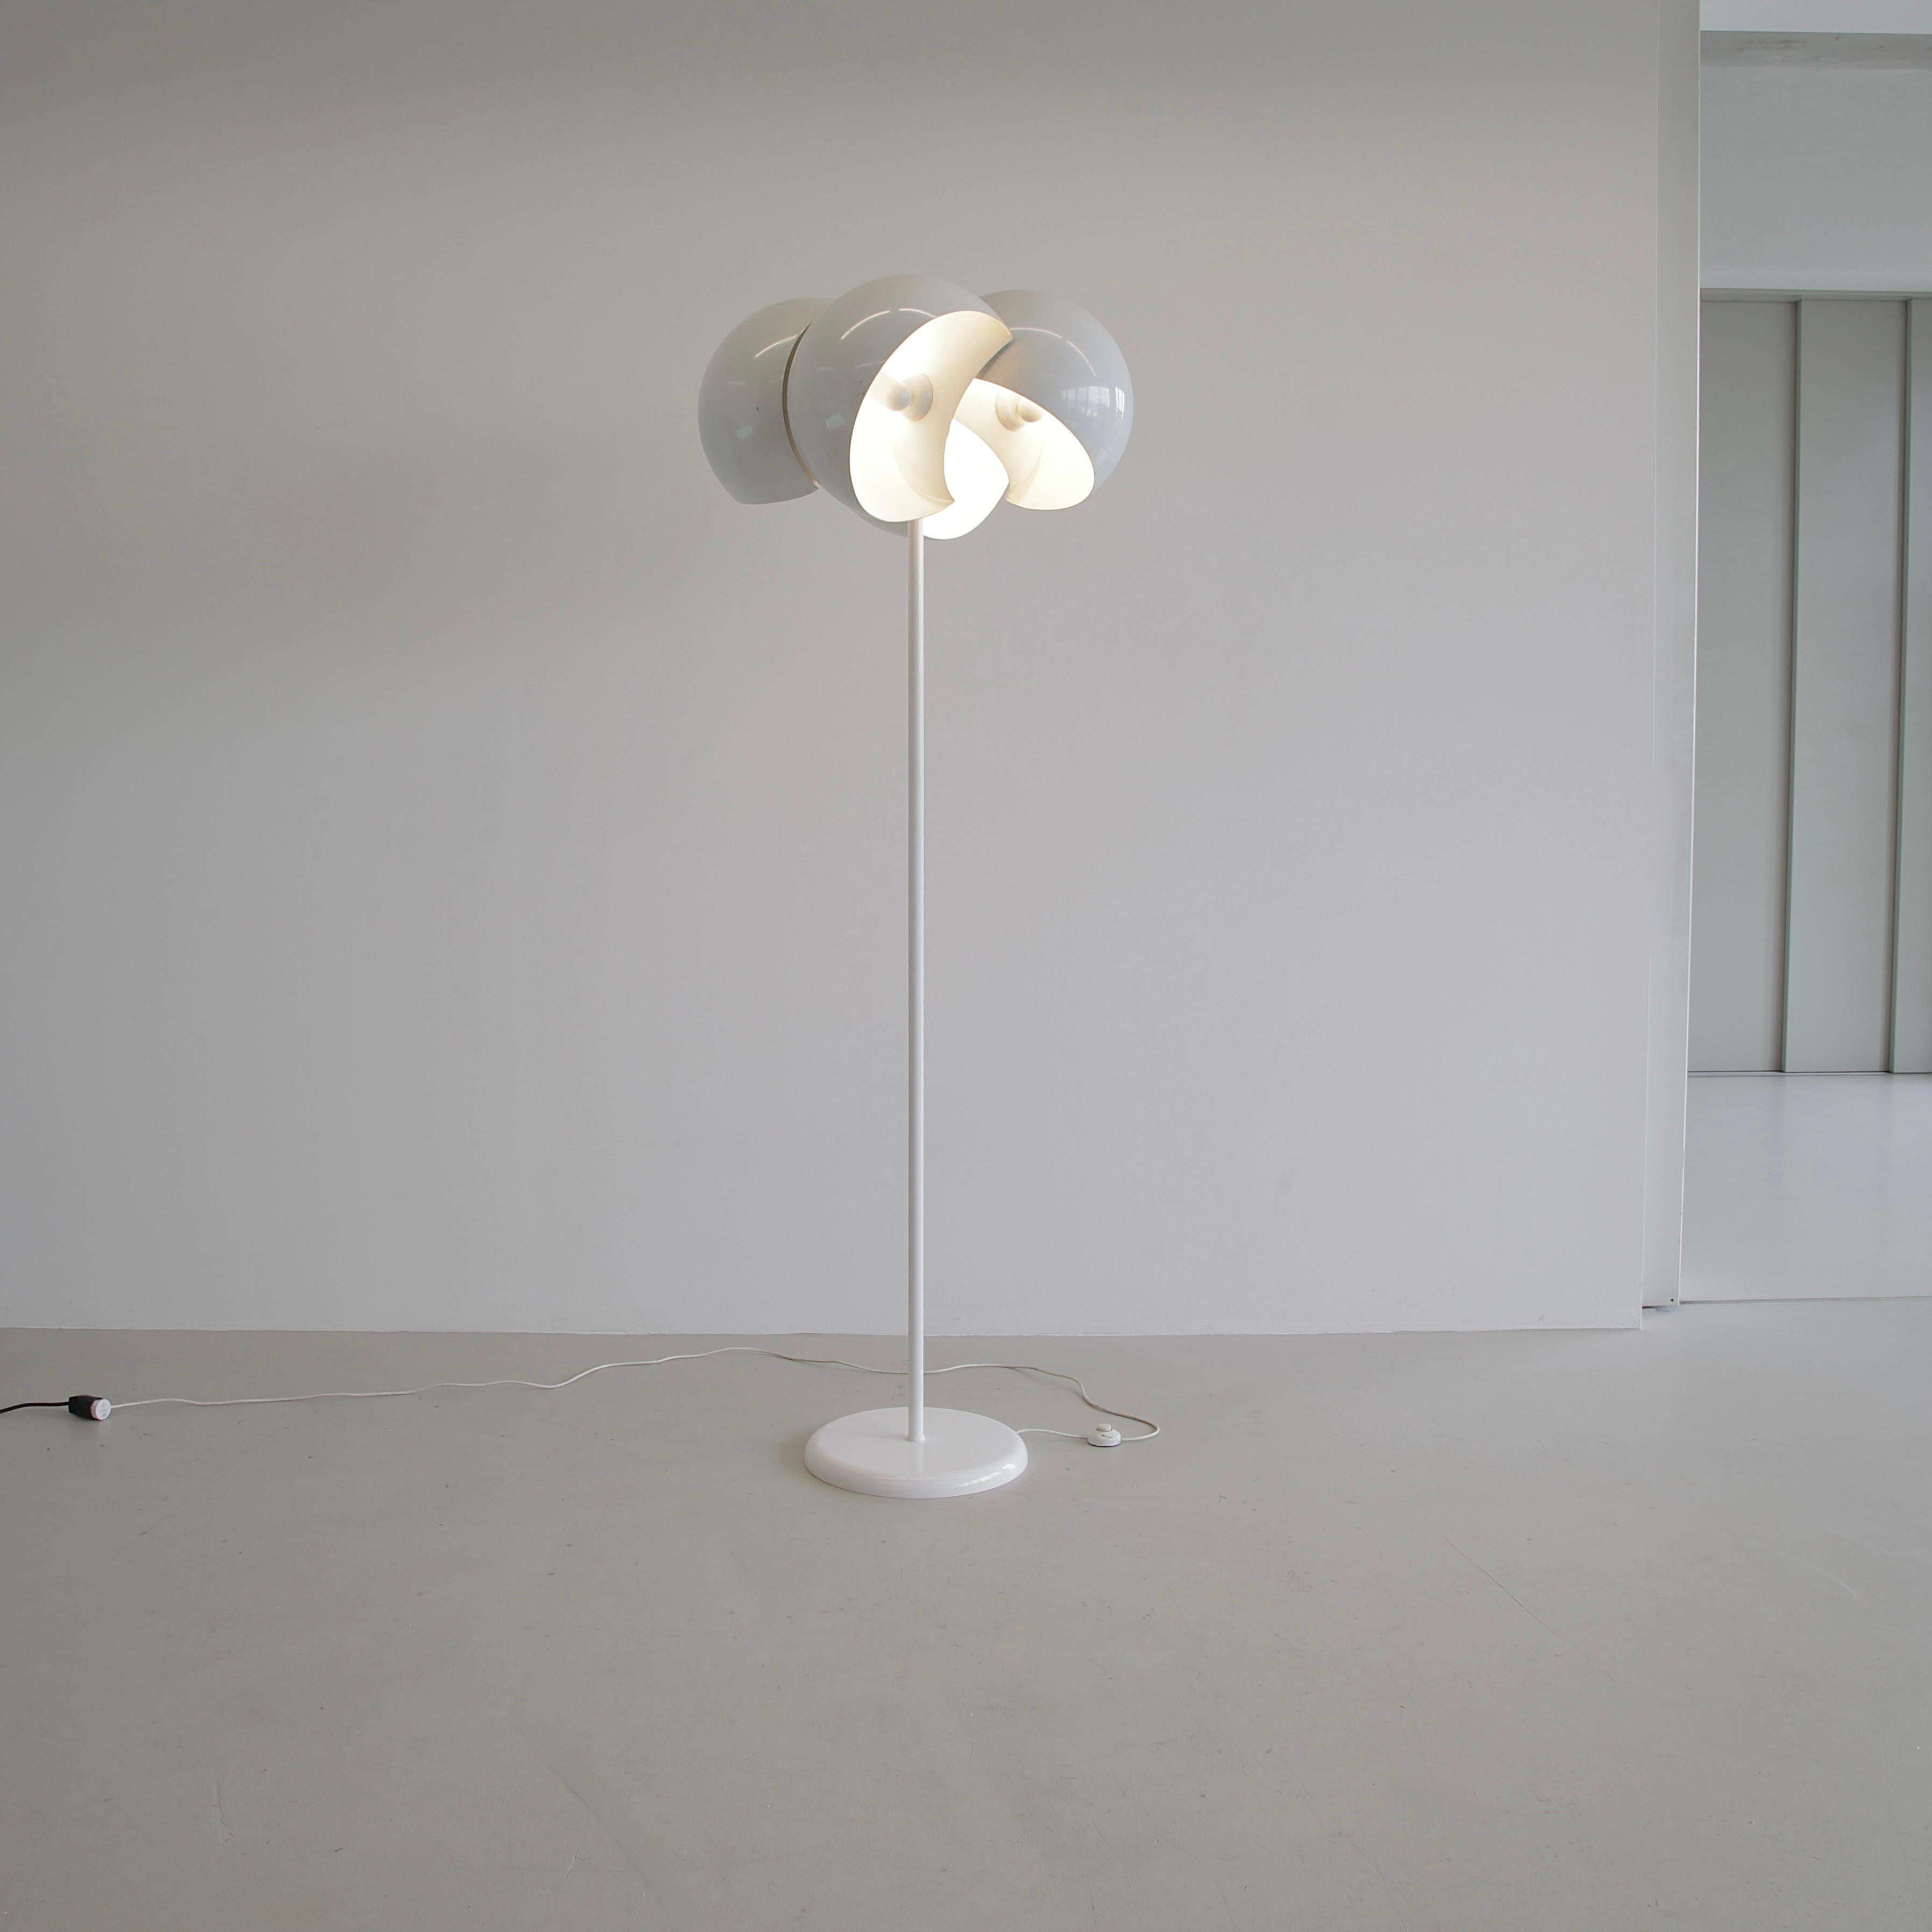 Painted GIUNONE Floor Lamp designed by Vico MAGISTRETTI for Artemide, 1970 For Sale